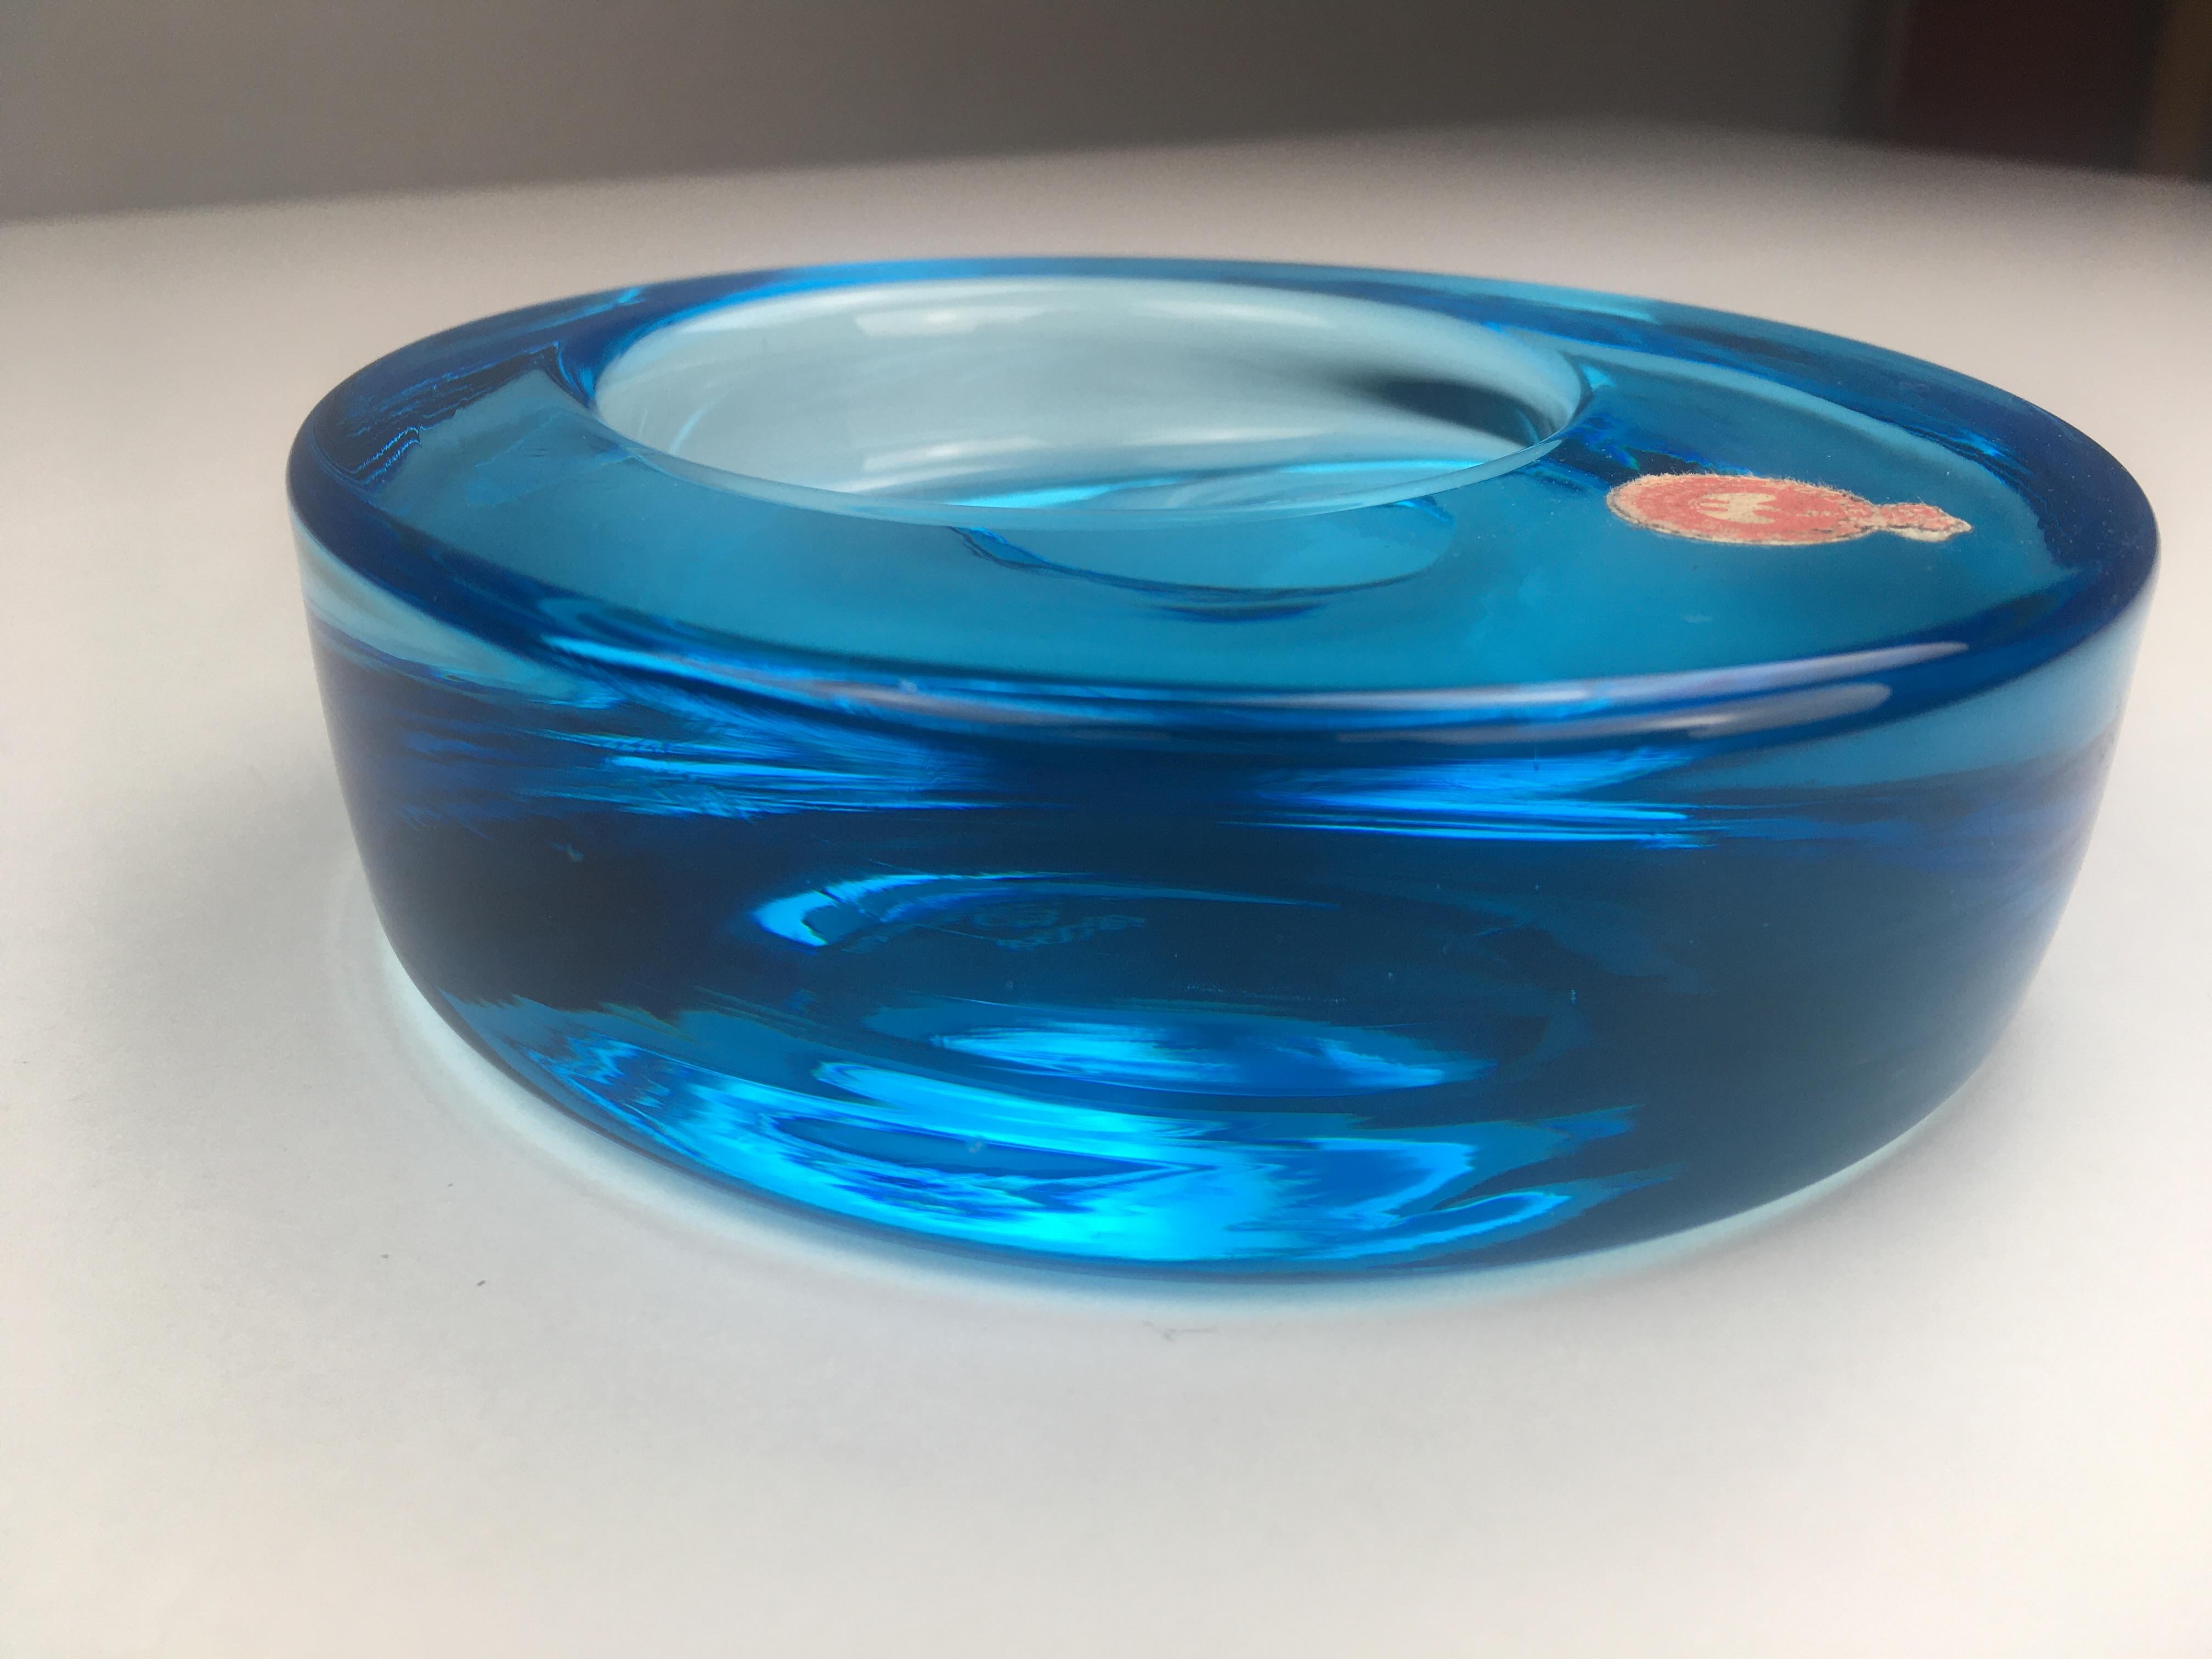 1960´s Danish handblown blue glass ashtray - bowl by Per Lütken for Holmegaard.

The circular handblown ashtray feature an extremly rich mixture of almost all varietys of blue collors from the very, very bright almost transparent blue to the deep